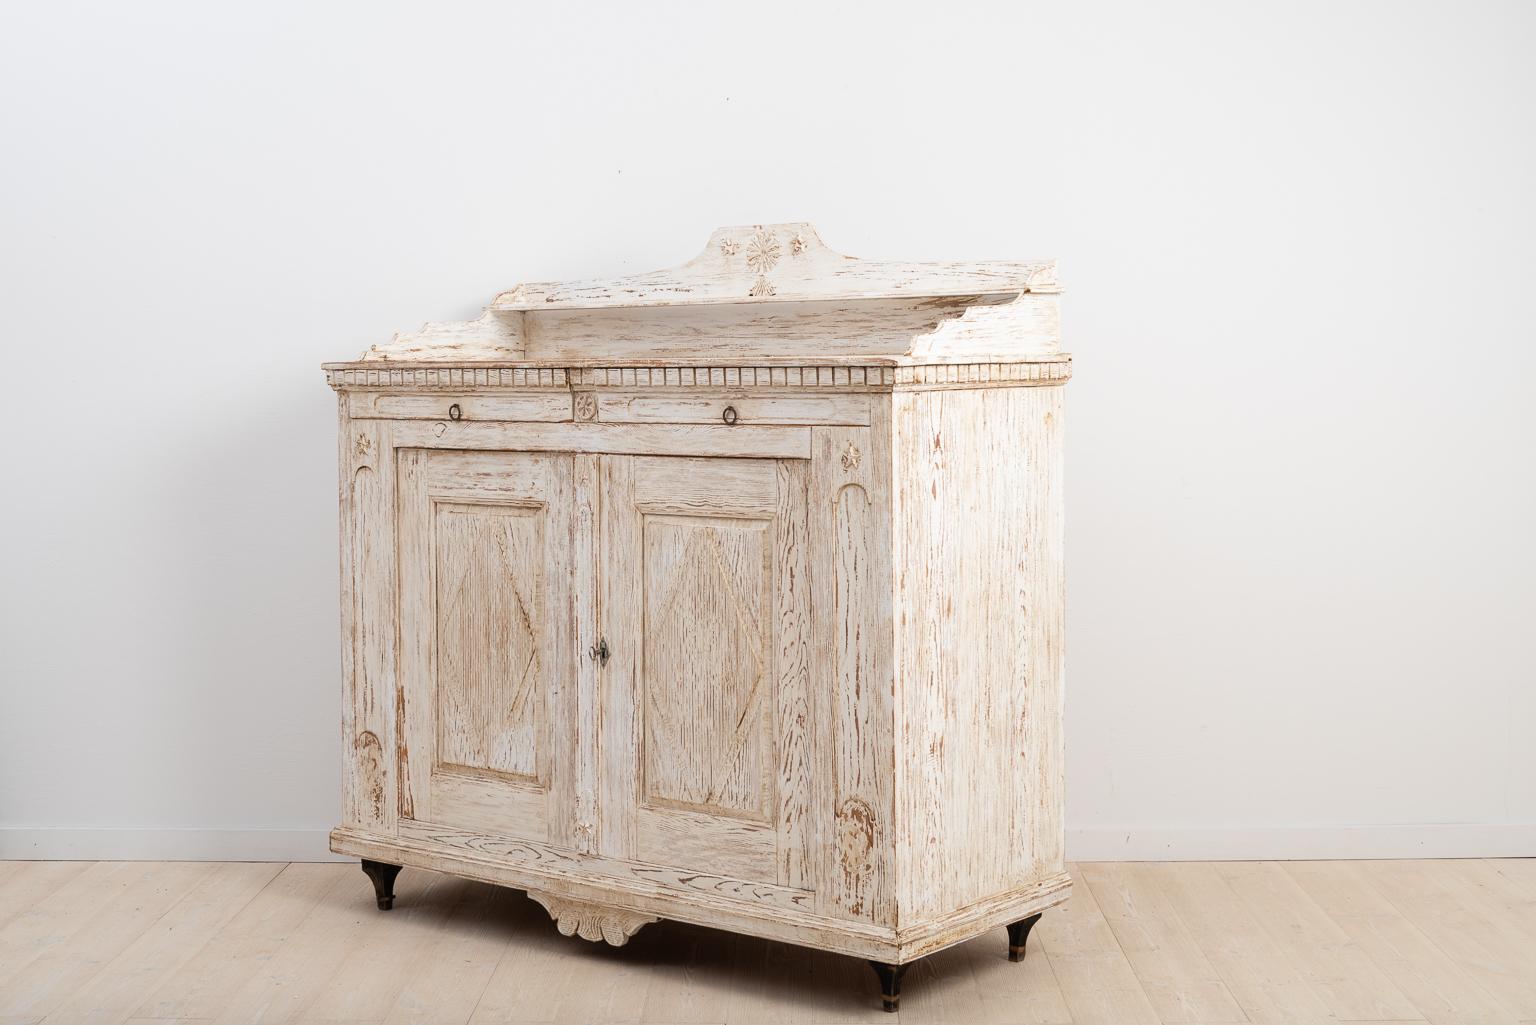 Swedish Gustavian Sideboard from the Late 18th Century with Old Historic Paint (Schwedisch)